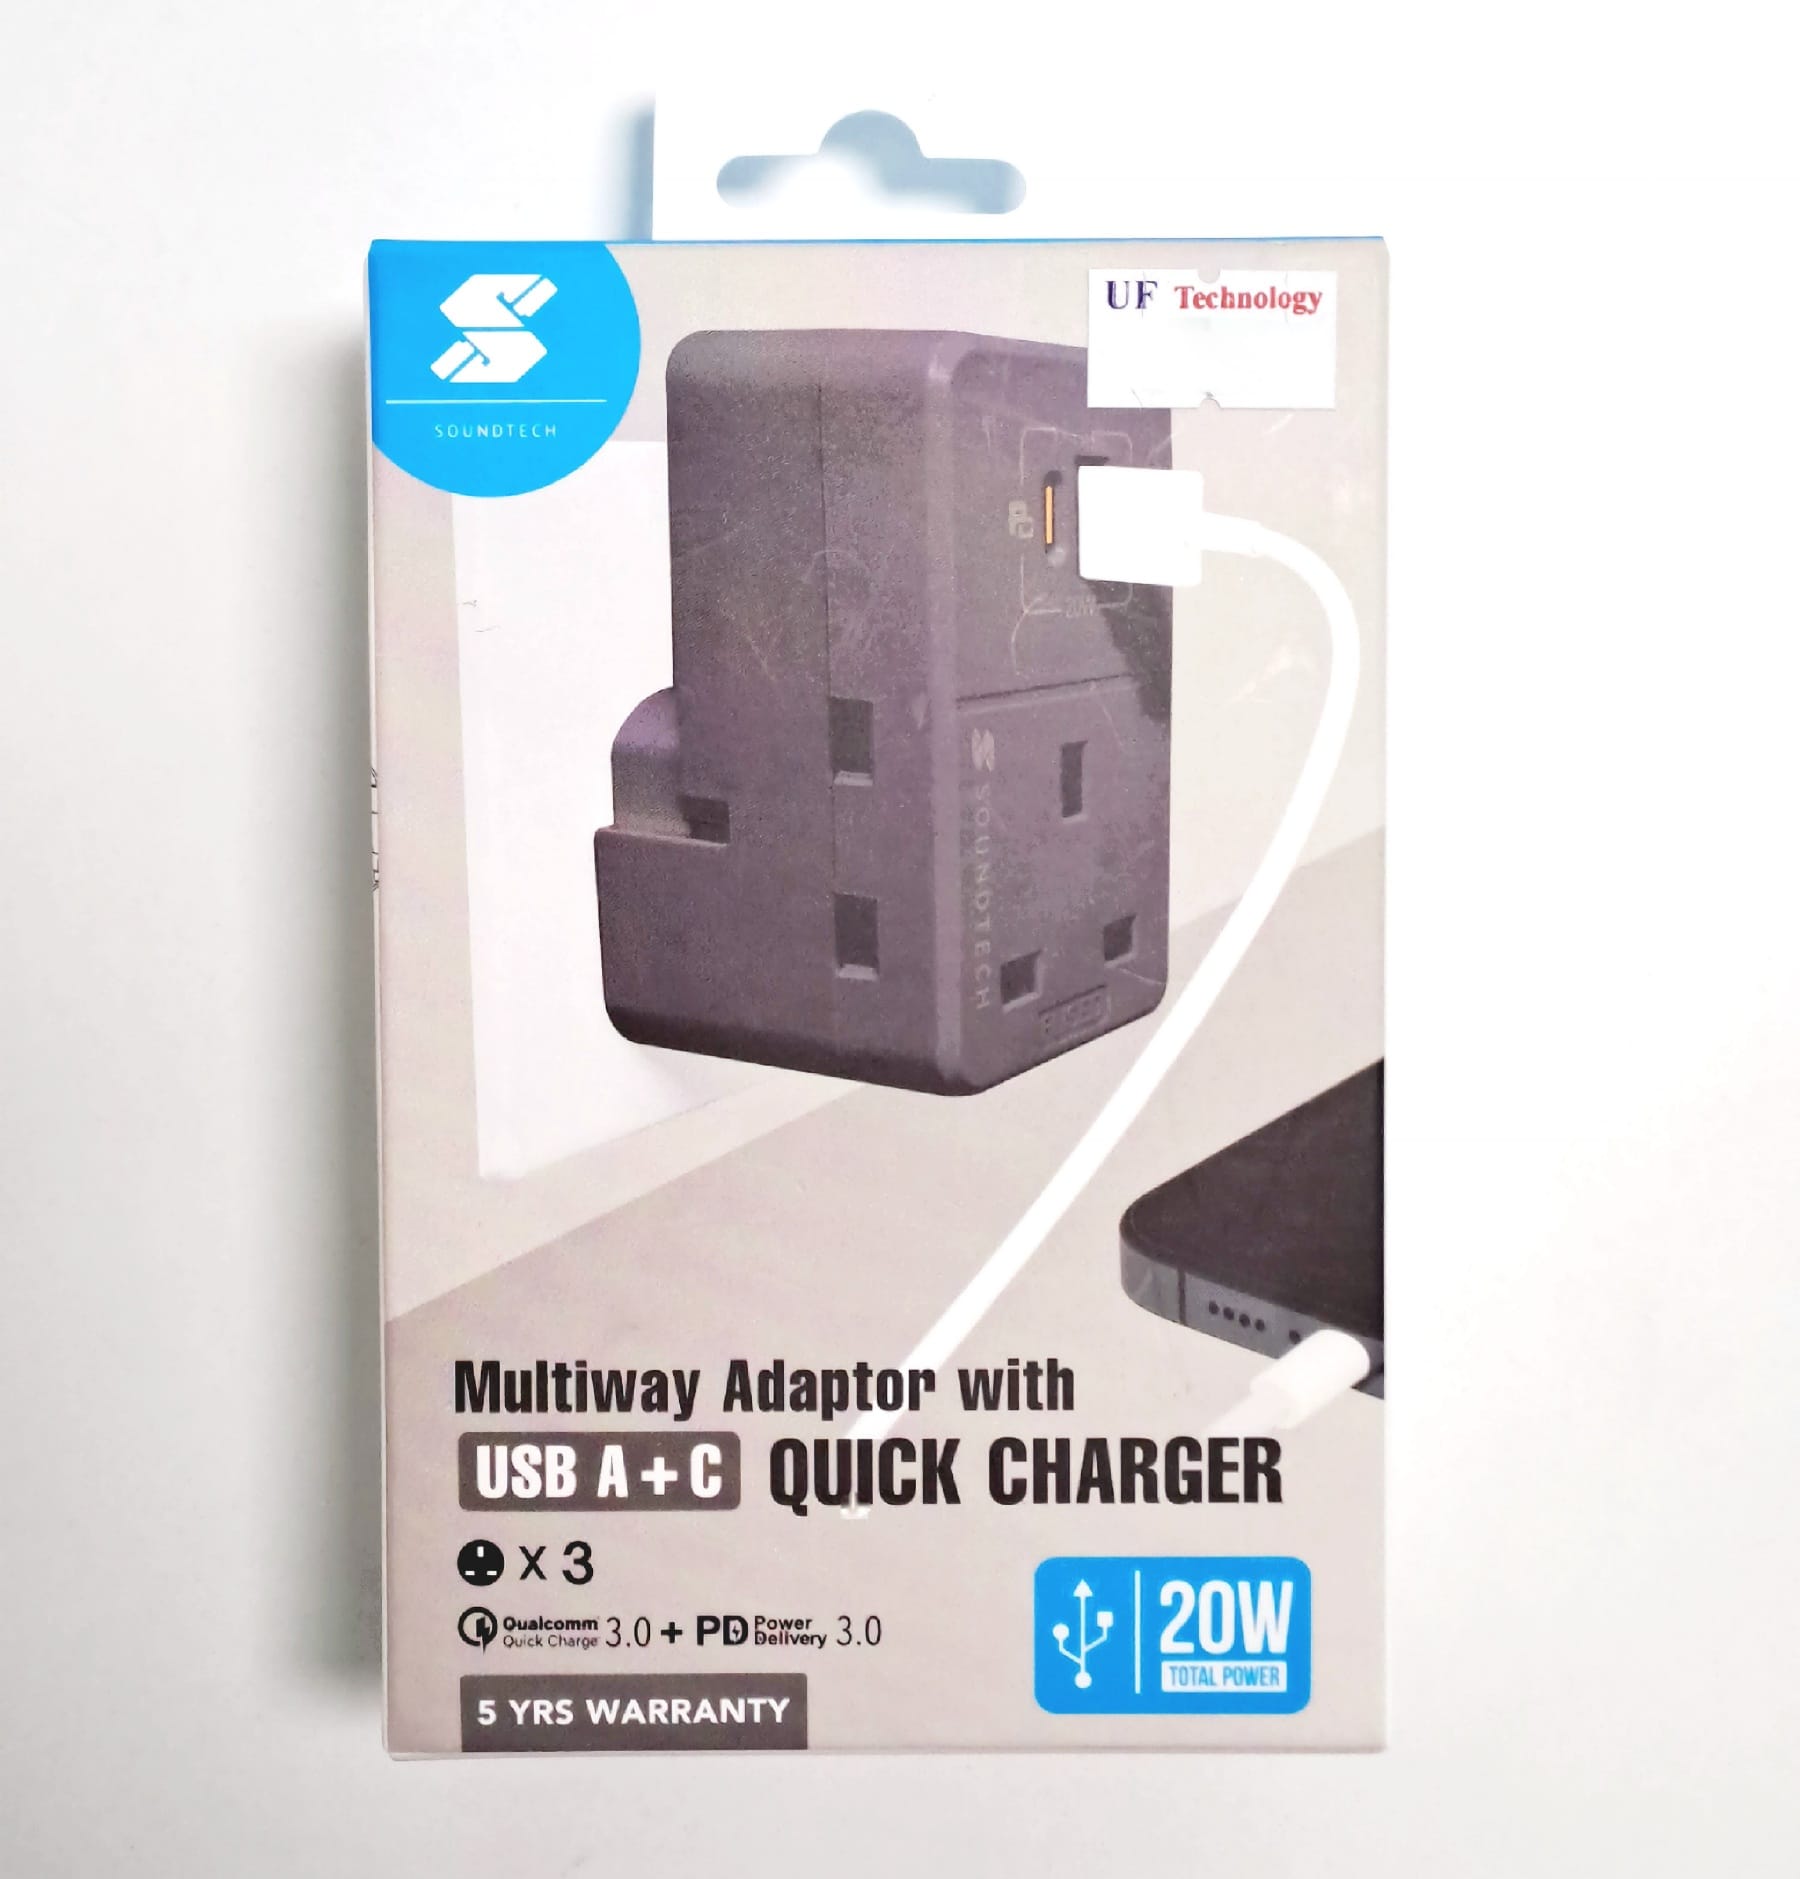 Soundtech Multiway Adaptor with USB A+C Quick Charger (Dark Grey)